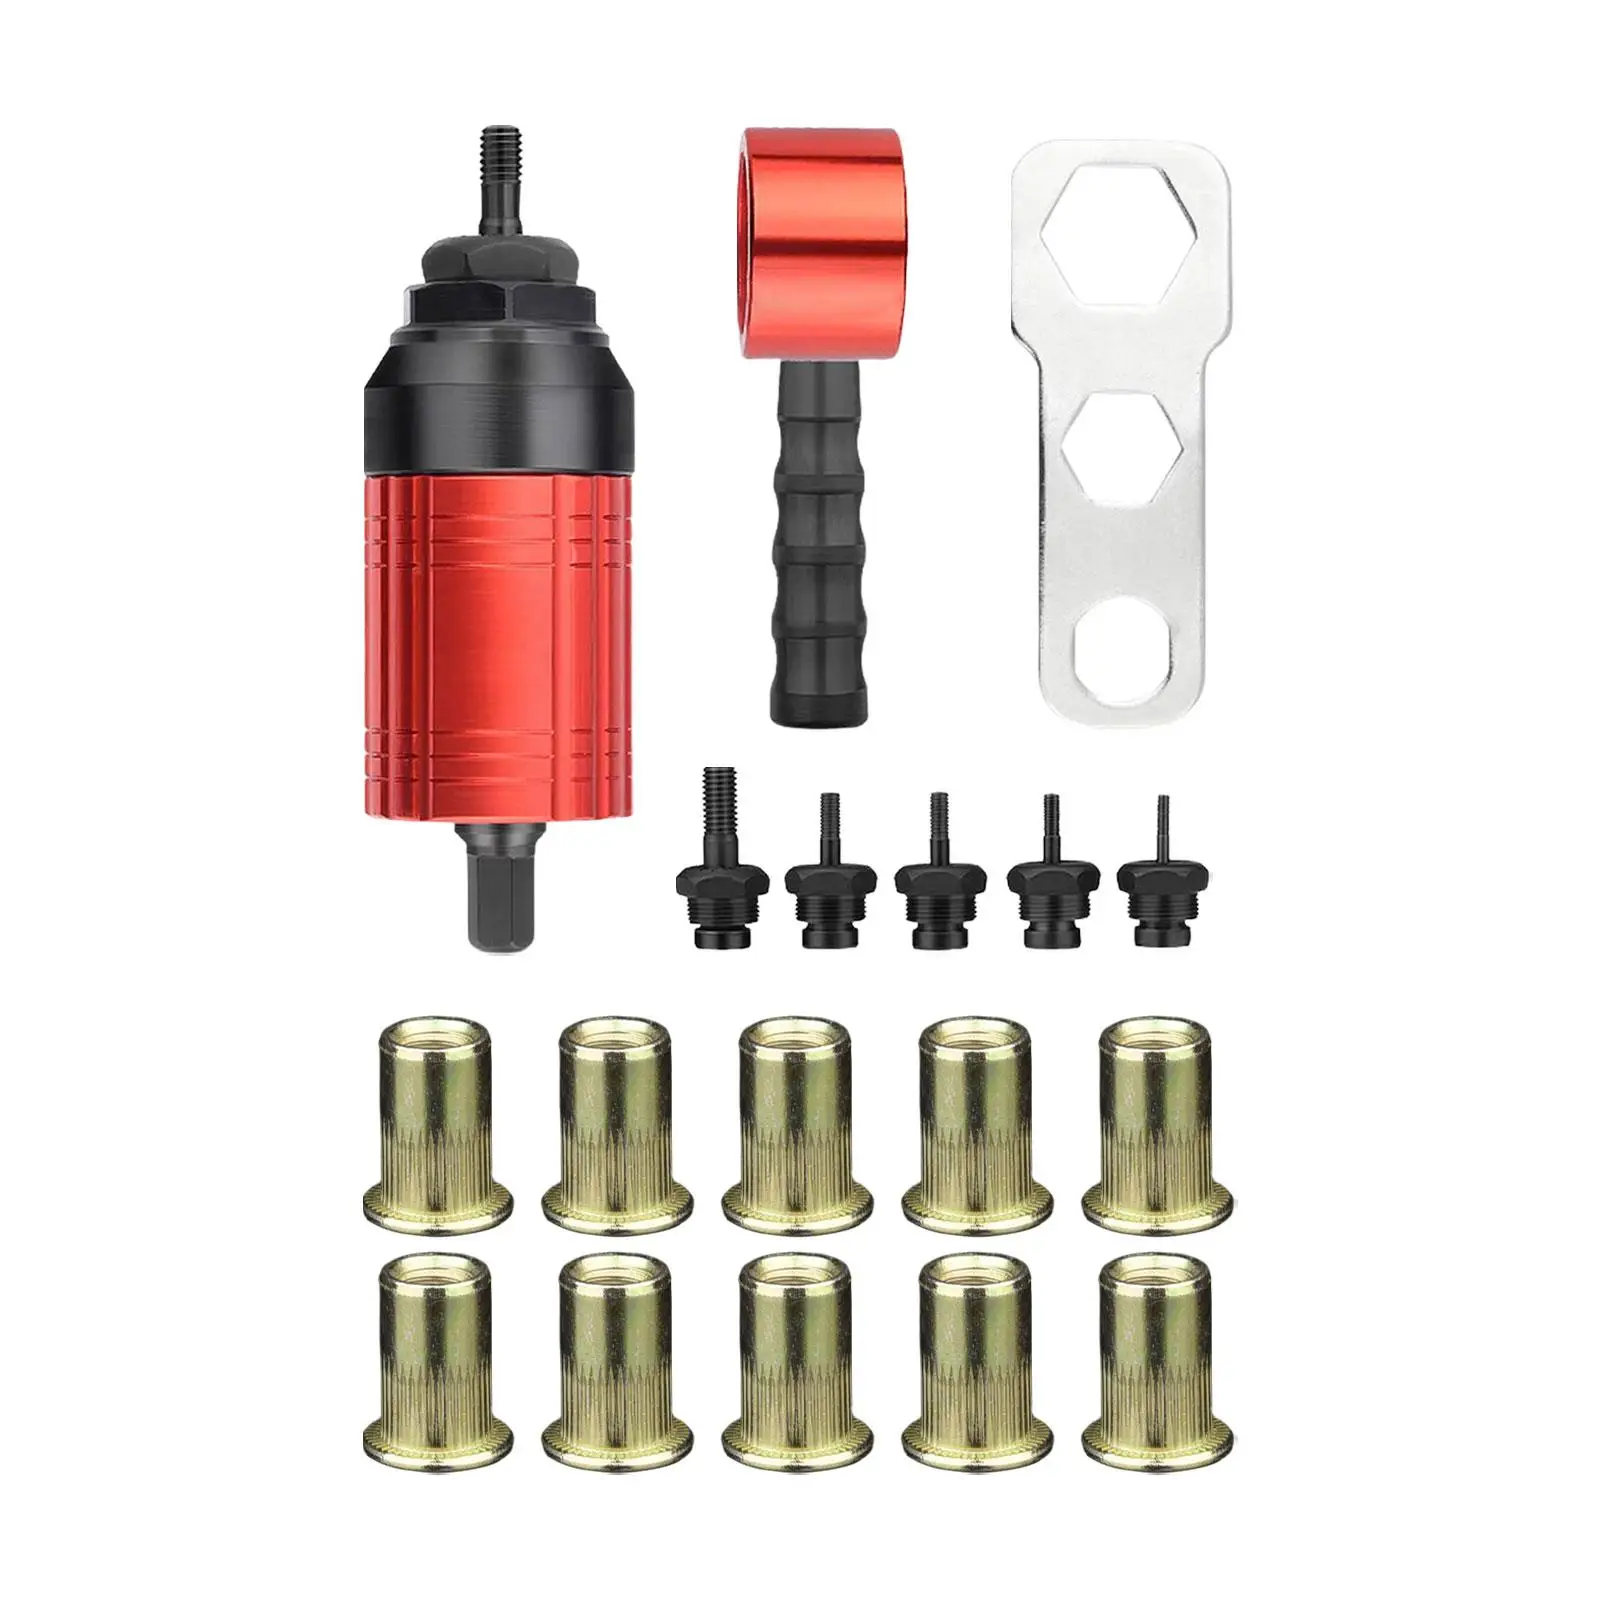 Rivet Nut Drill Adaptor Attachment Threaded Insert Installation Tool for Repair Electrical Appliance Car Furniture Architecture